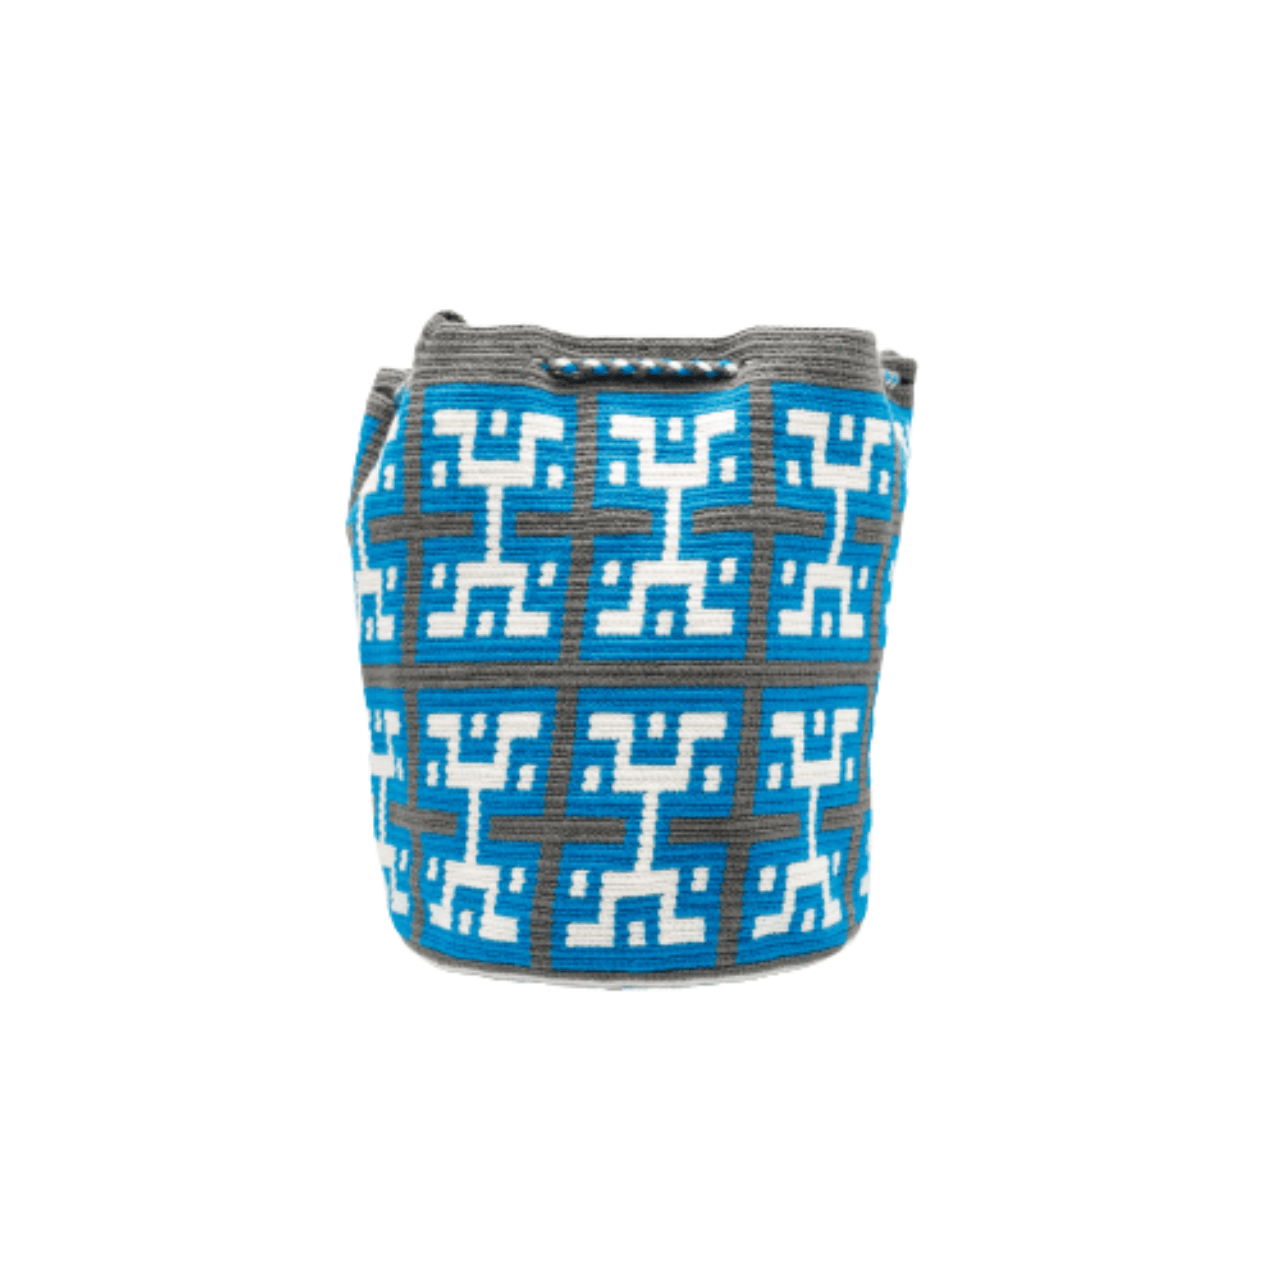 Tania Wayuu bag in rich teal and gray with white accents. The distinctive design sets this Wayuu bag apart as a unique addition to our collection.